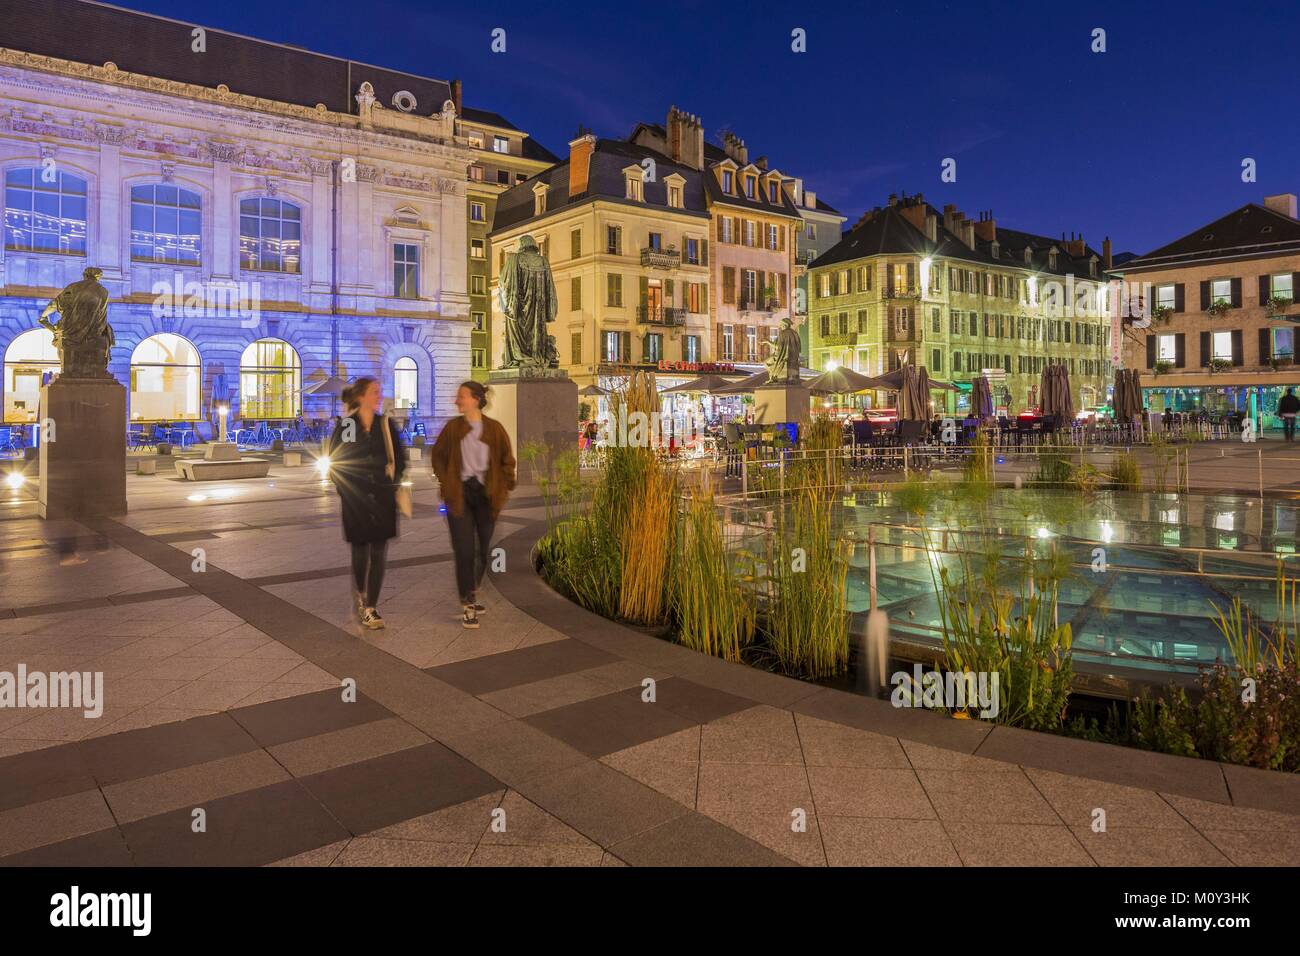 France,Savoie,Chambery,the old town,place of the Palais de Justice,Charles-Alphonse Gumery's statues of which that of Antoine Favre in the center and the museum of Beaux-Arts,Art Gallery Stock Photo